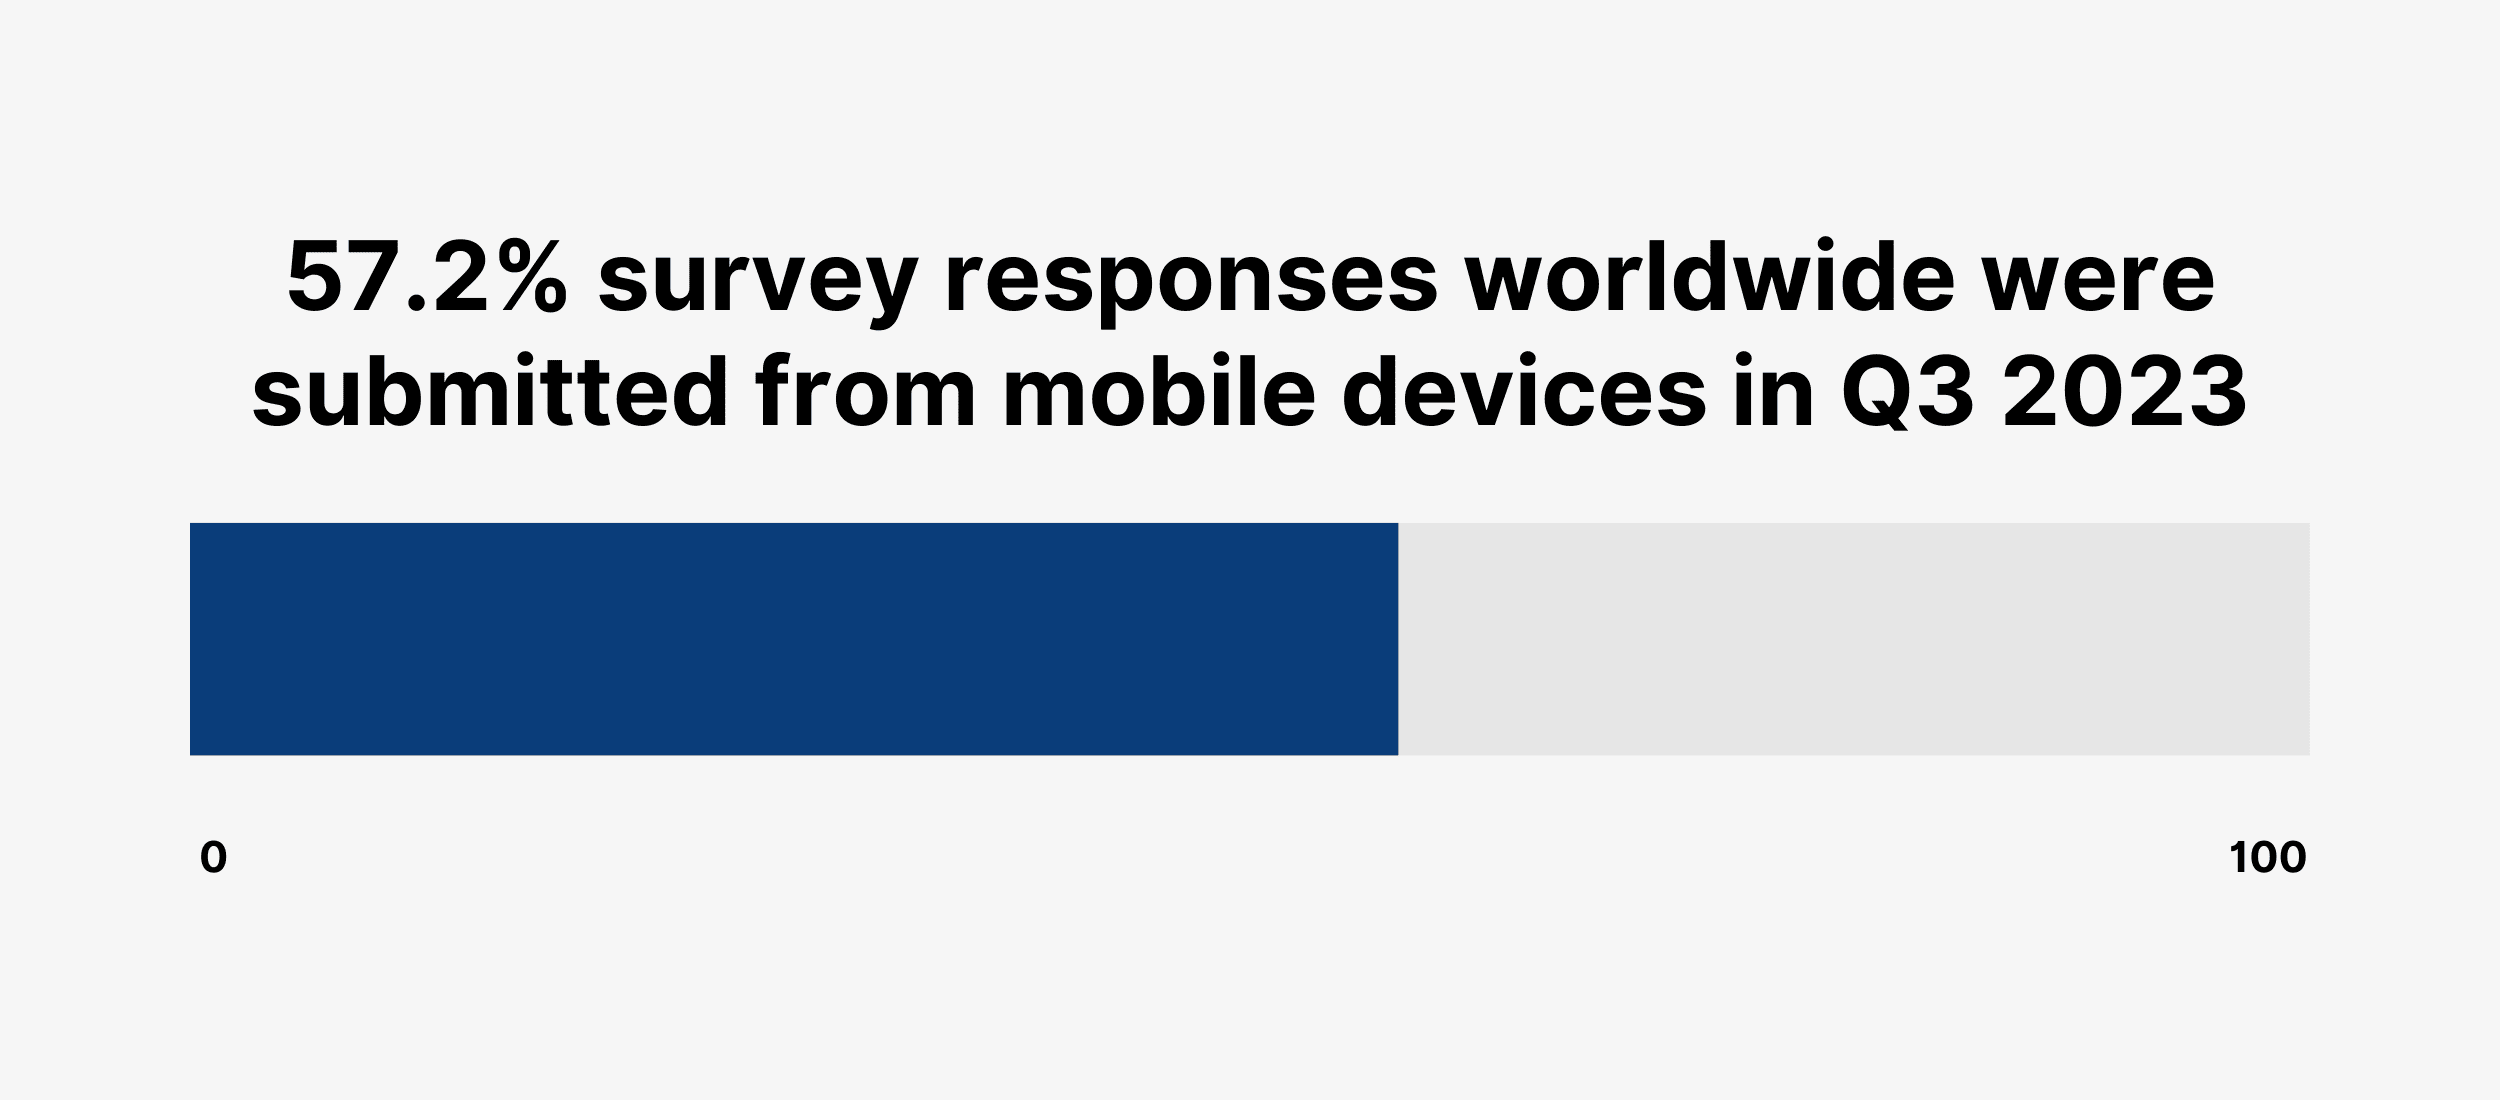 57.2% survey responses worldwide were submitted from mobile devices in Q3 2023